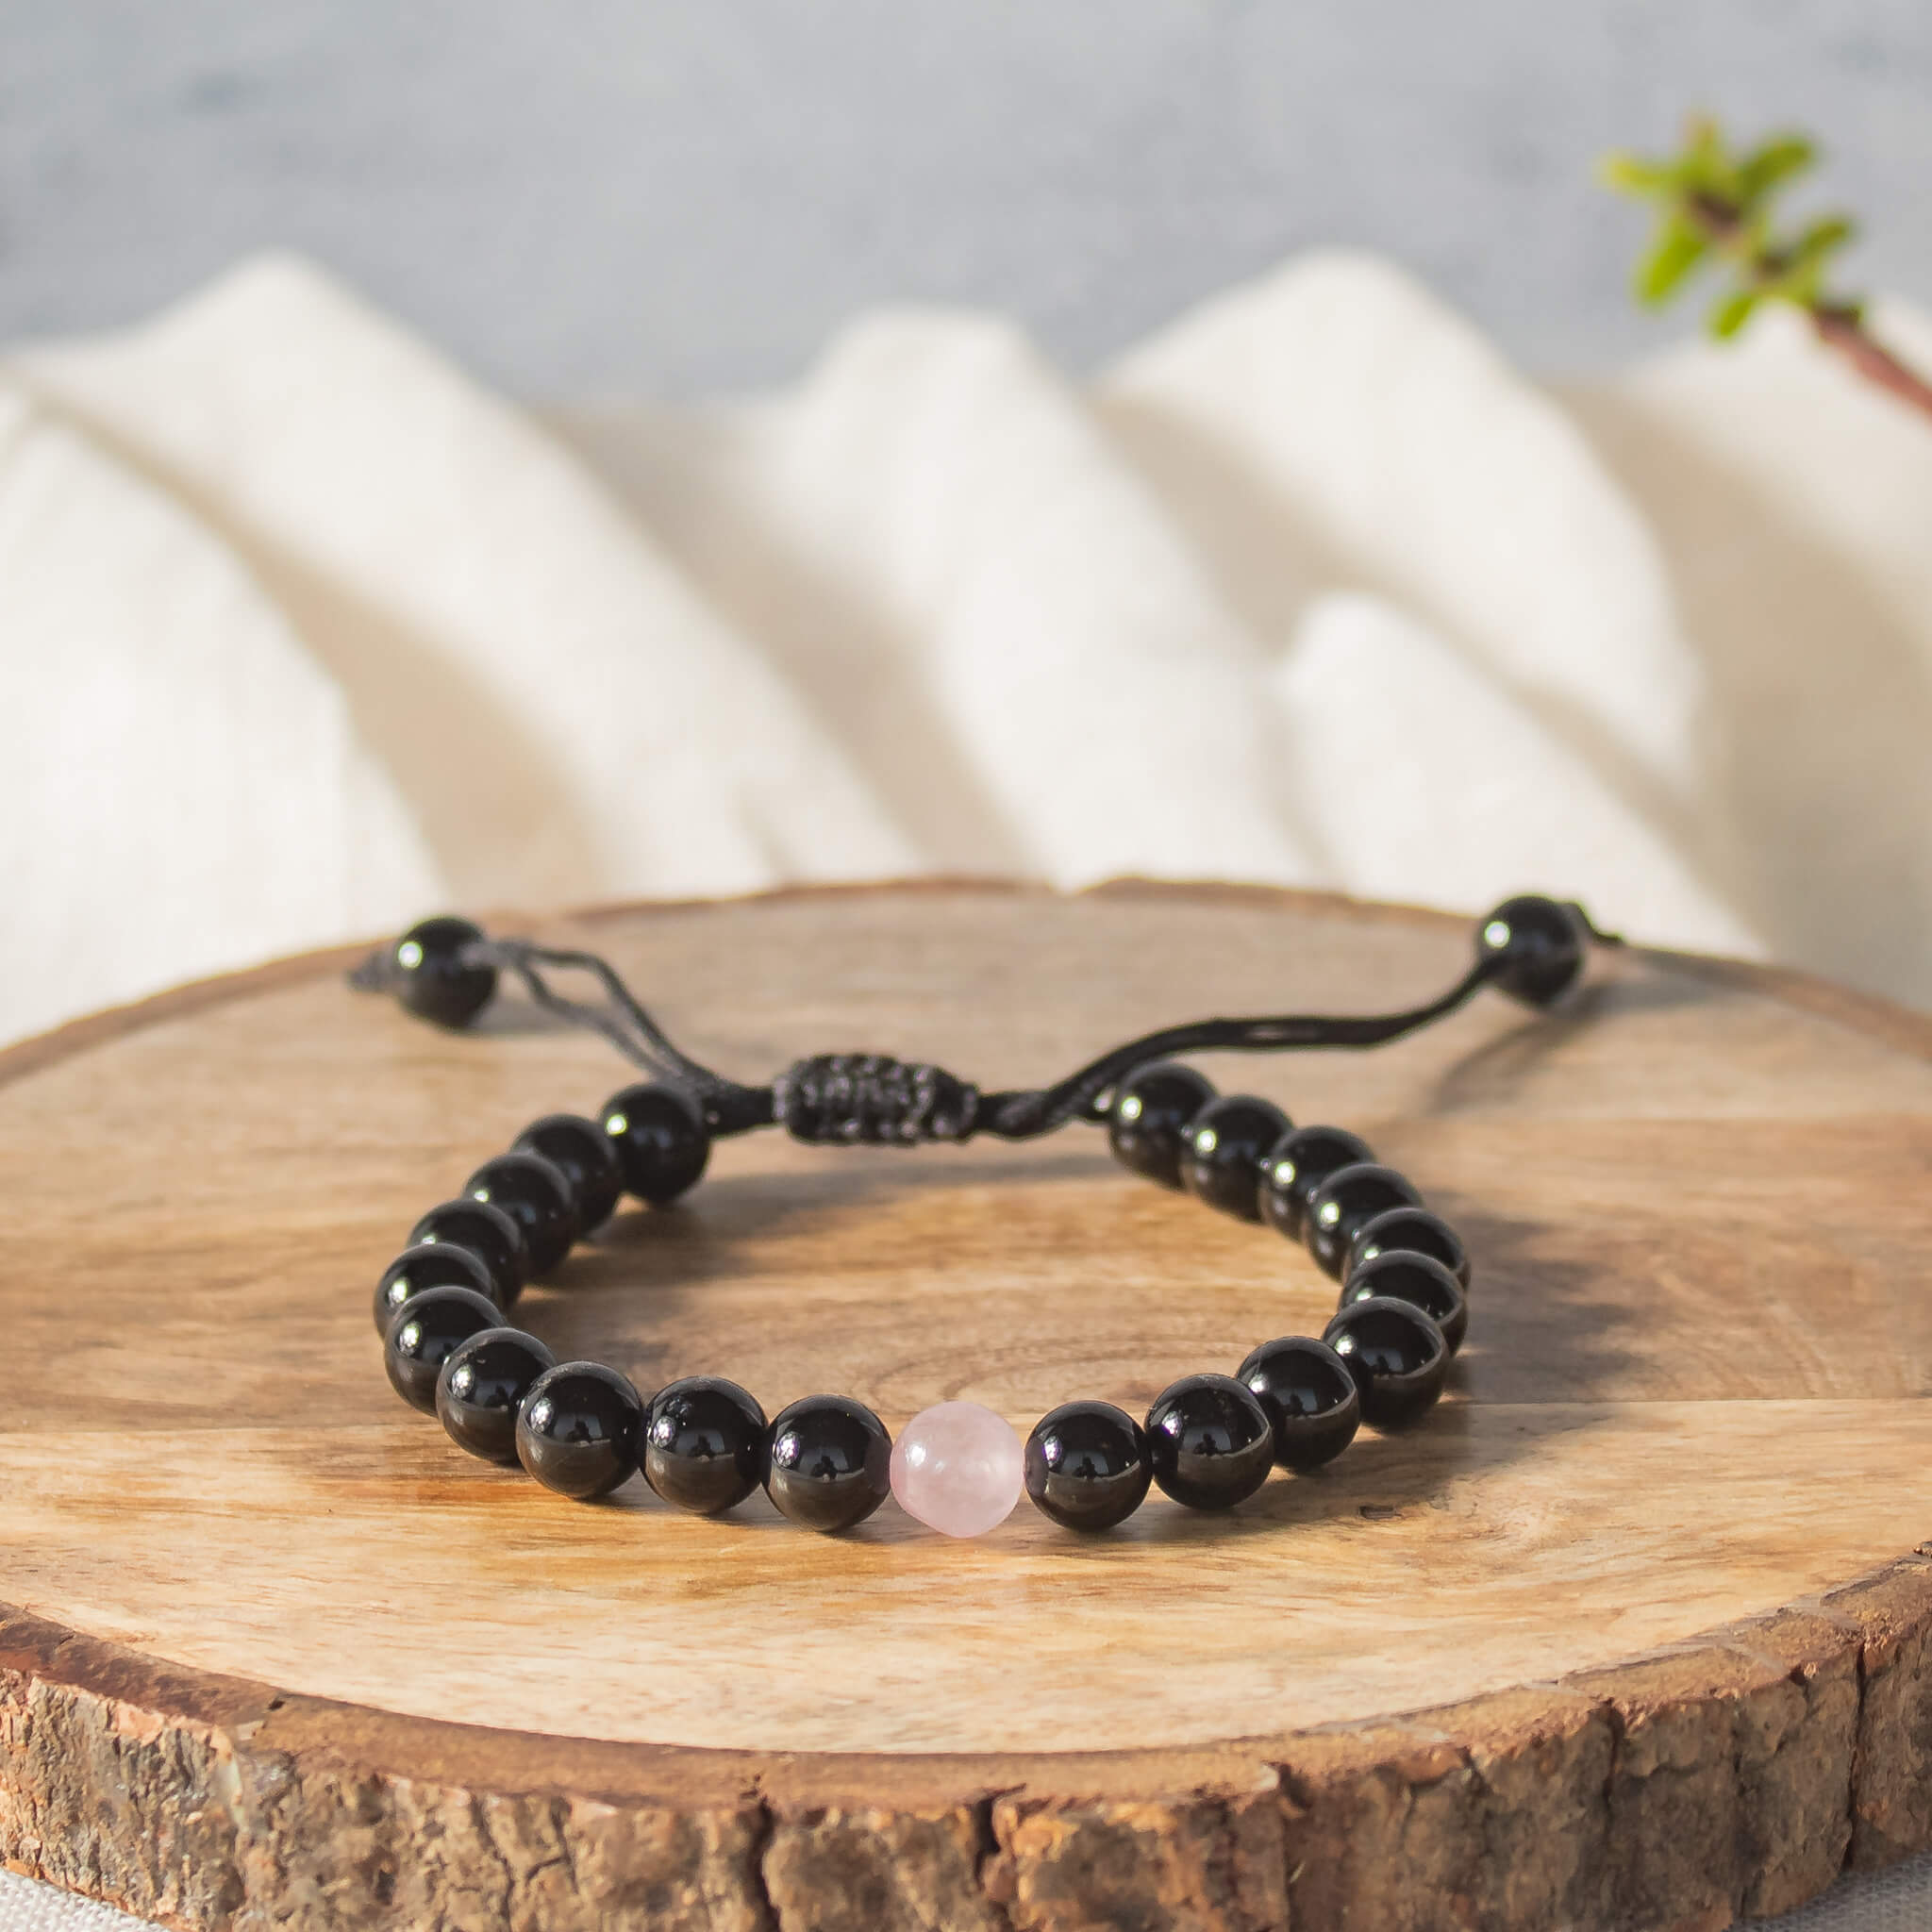 Raw Black Tourmaline Bracelet Cuff Bangle Natural Stone Crystal Healing  Protection, Grounding, Stability, Psychic Attack - Etsy